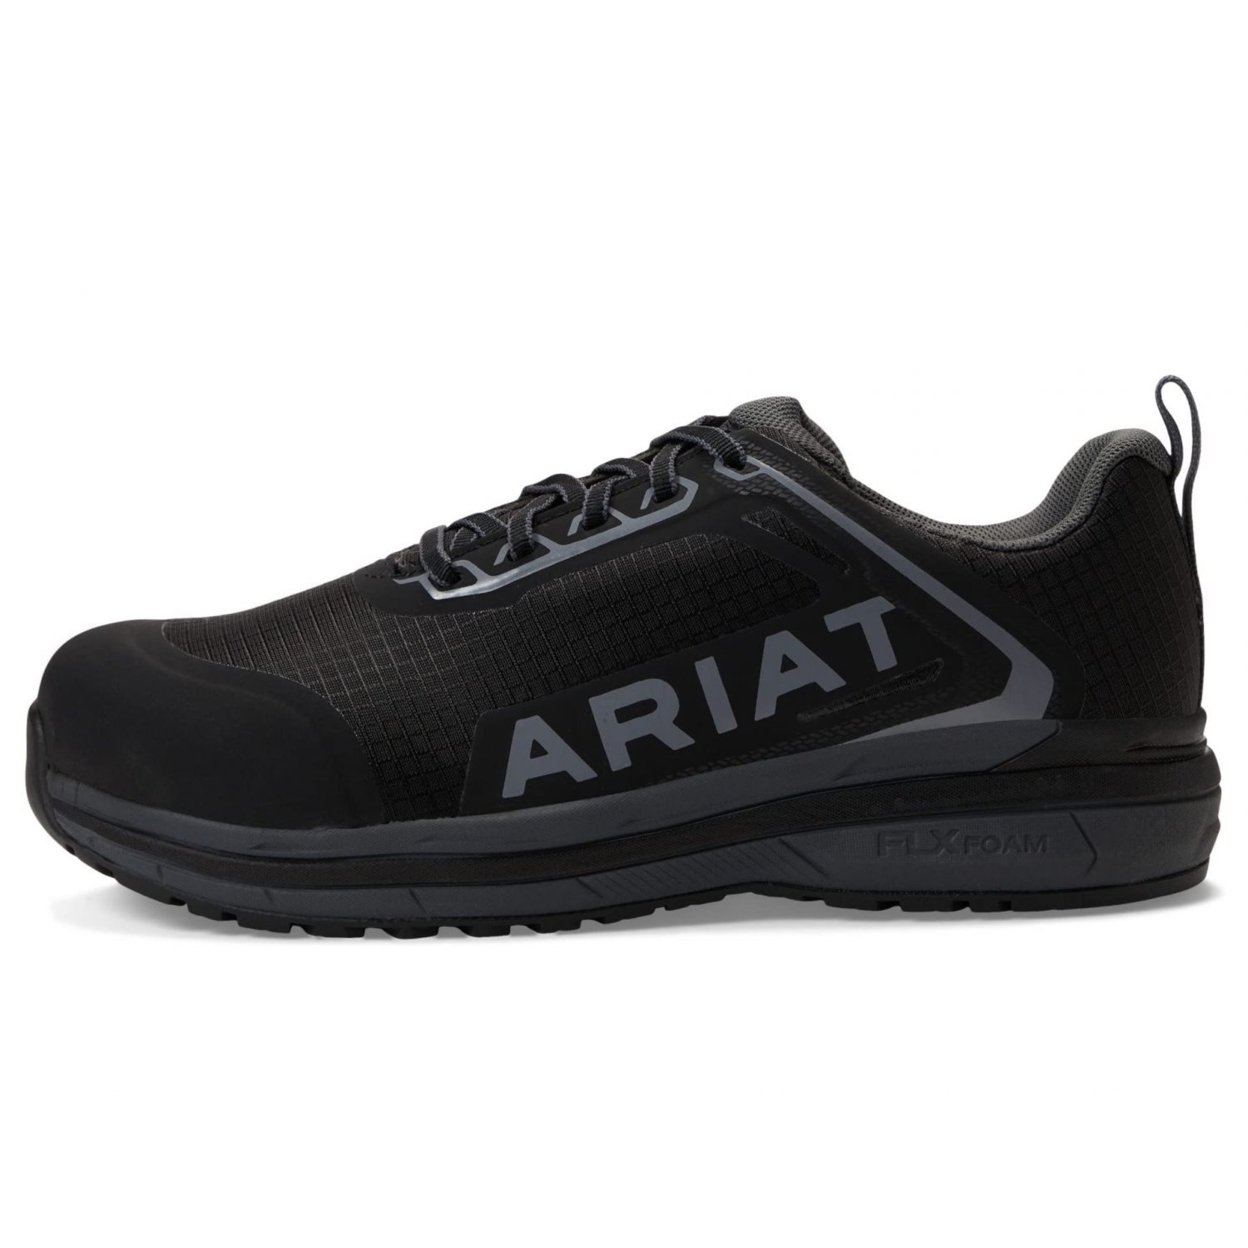 ARIAT Women's Outpace Composite Toe Safety Shoe Fire ONE SIZE BLACK - BLACK, 7.5 Wide